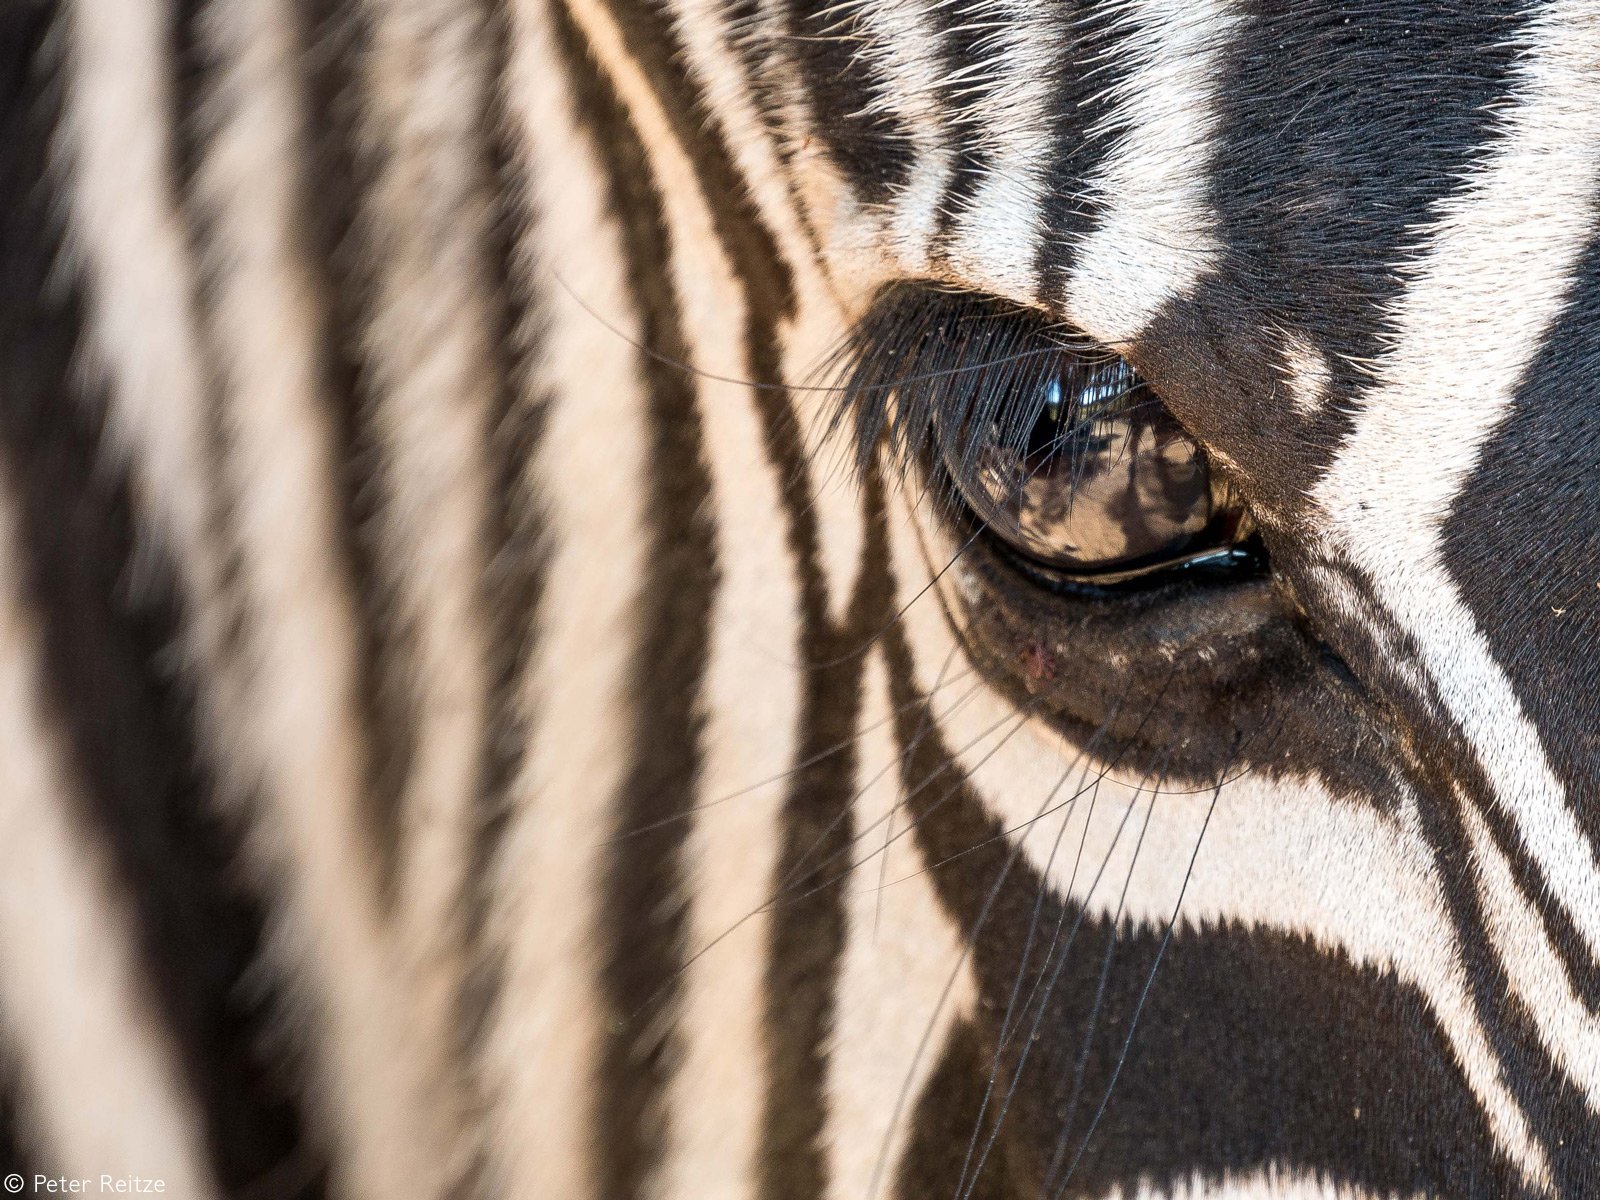 Up close with a zebra. Nelspruit, South Africa © Peter Reitze